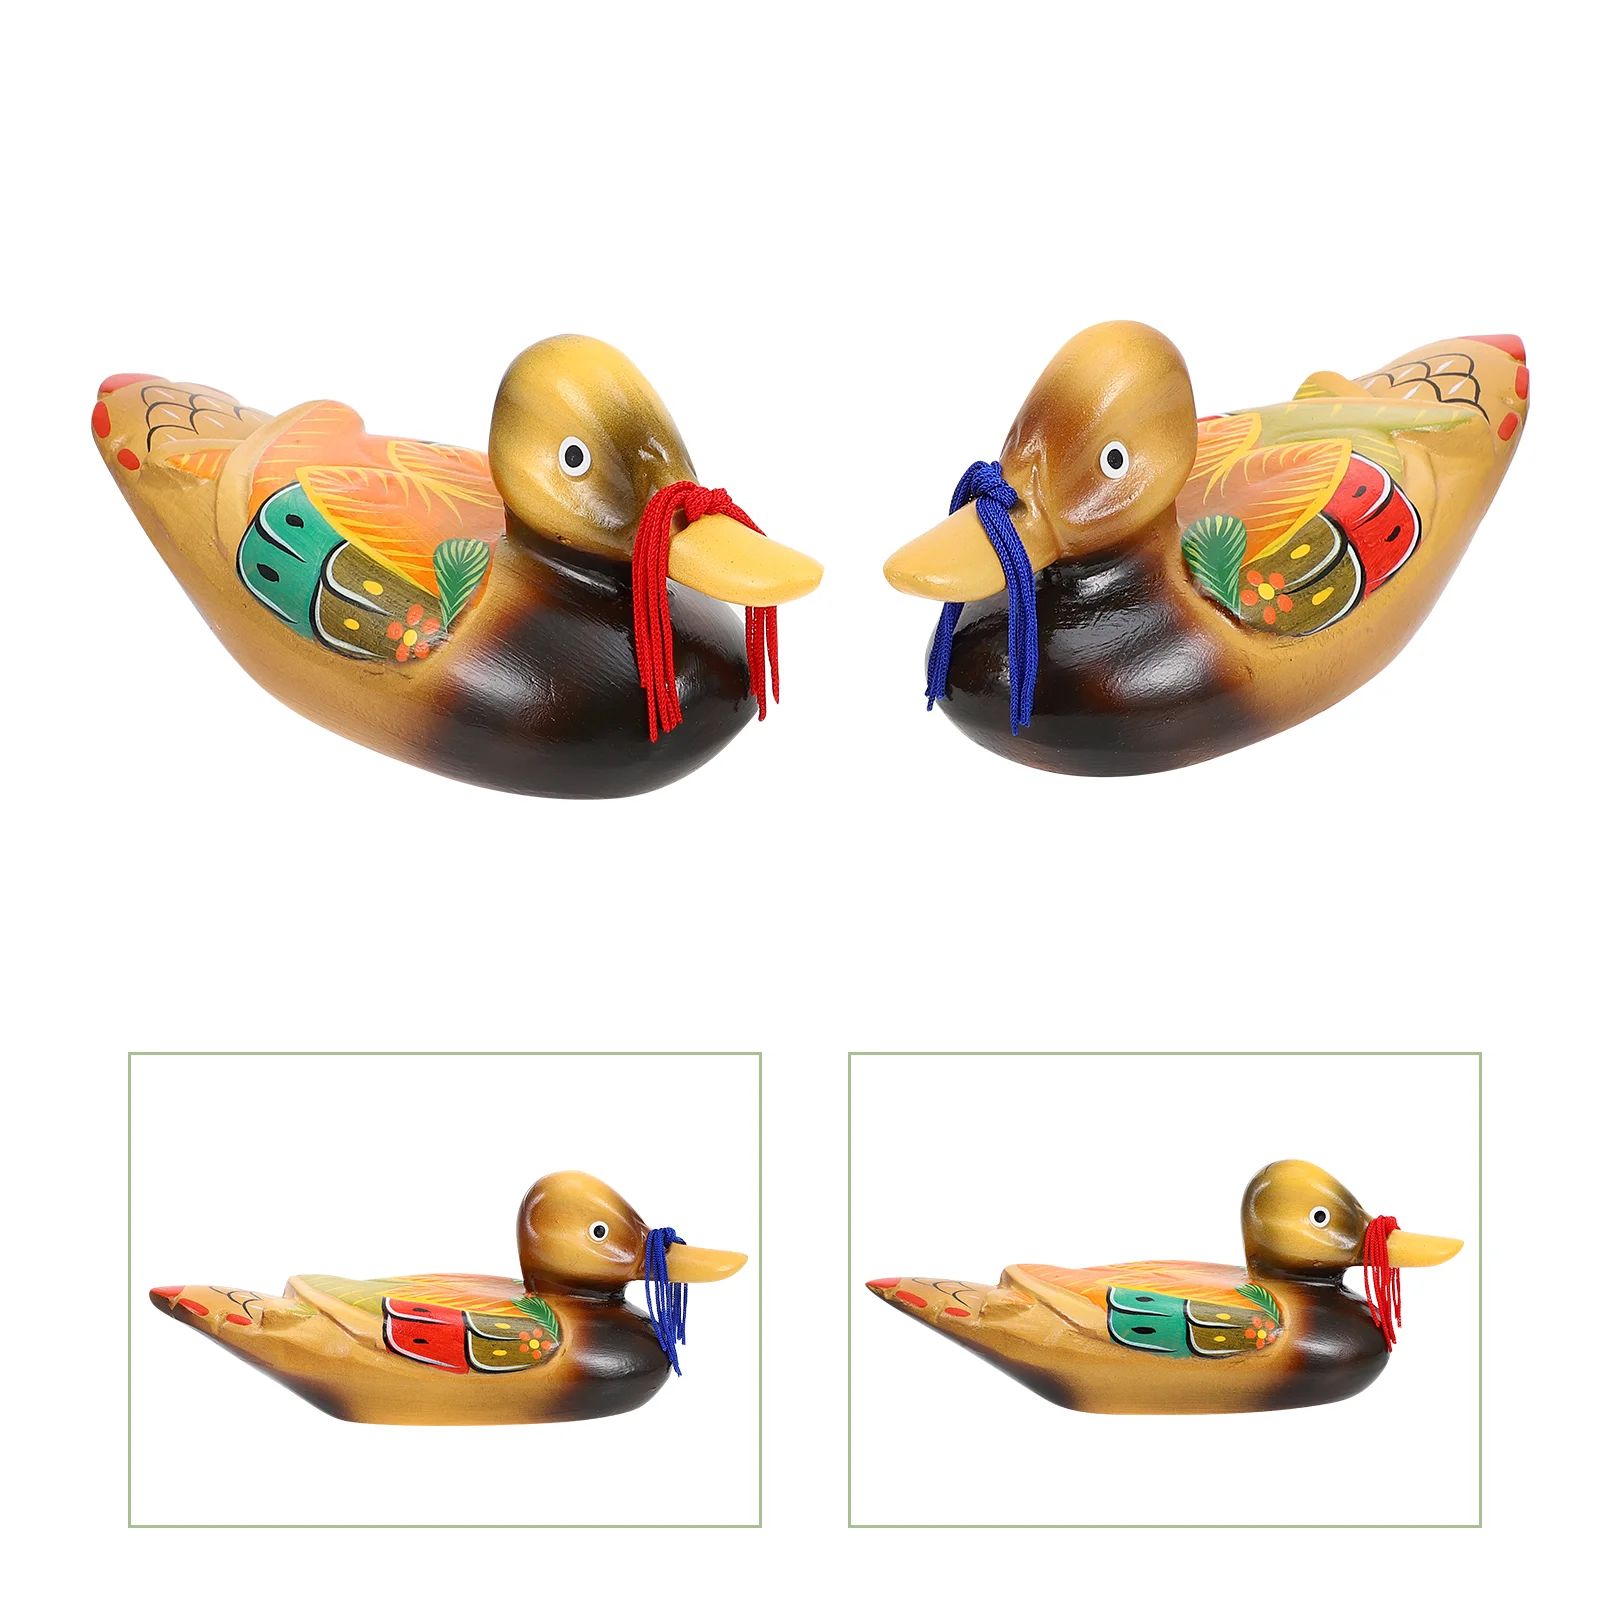 

2 Pcs Mandarin Duck Ornaments Colorful Drawing Adorns Wedding Decorations Tables Crafts Wood Wooden Colored Lovers House Home